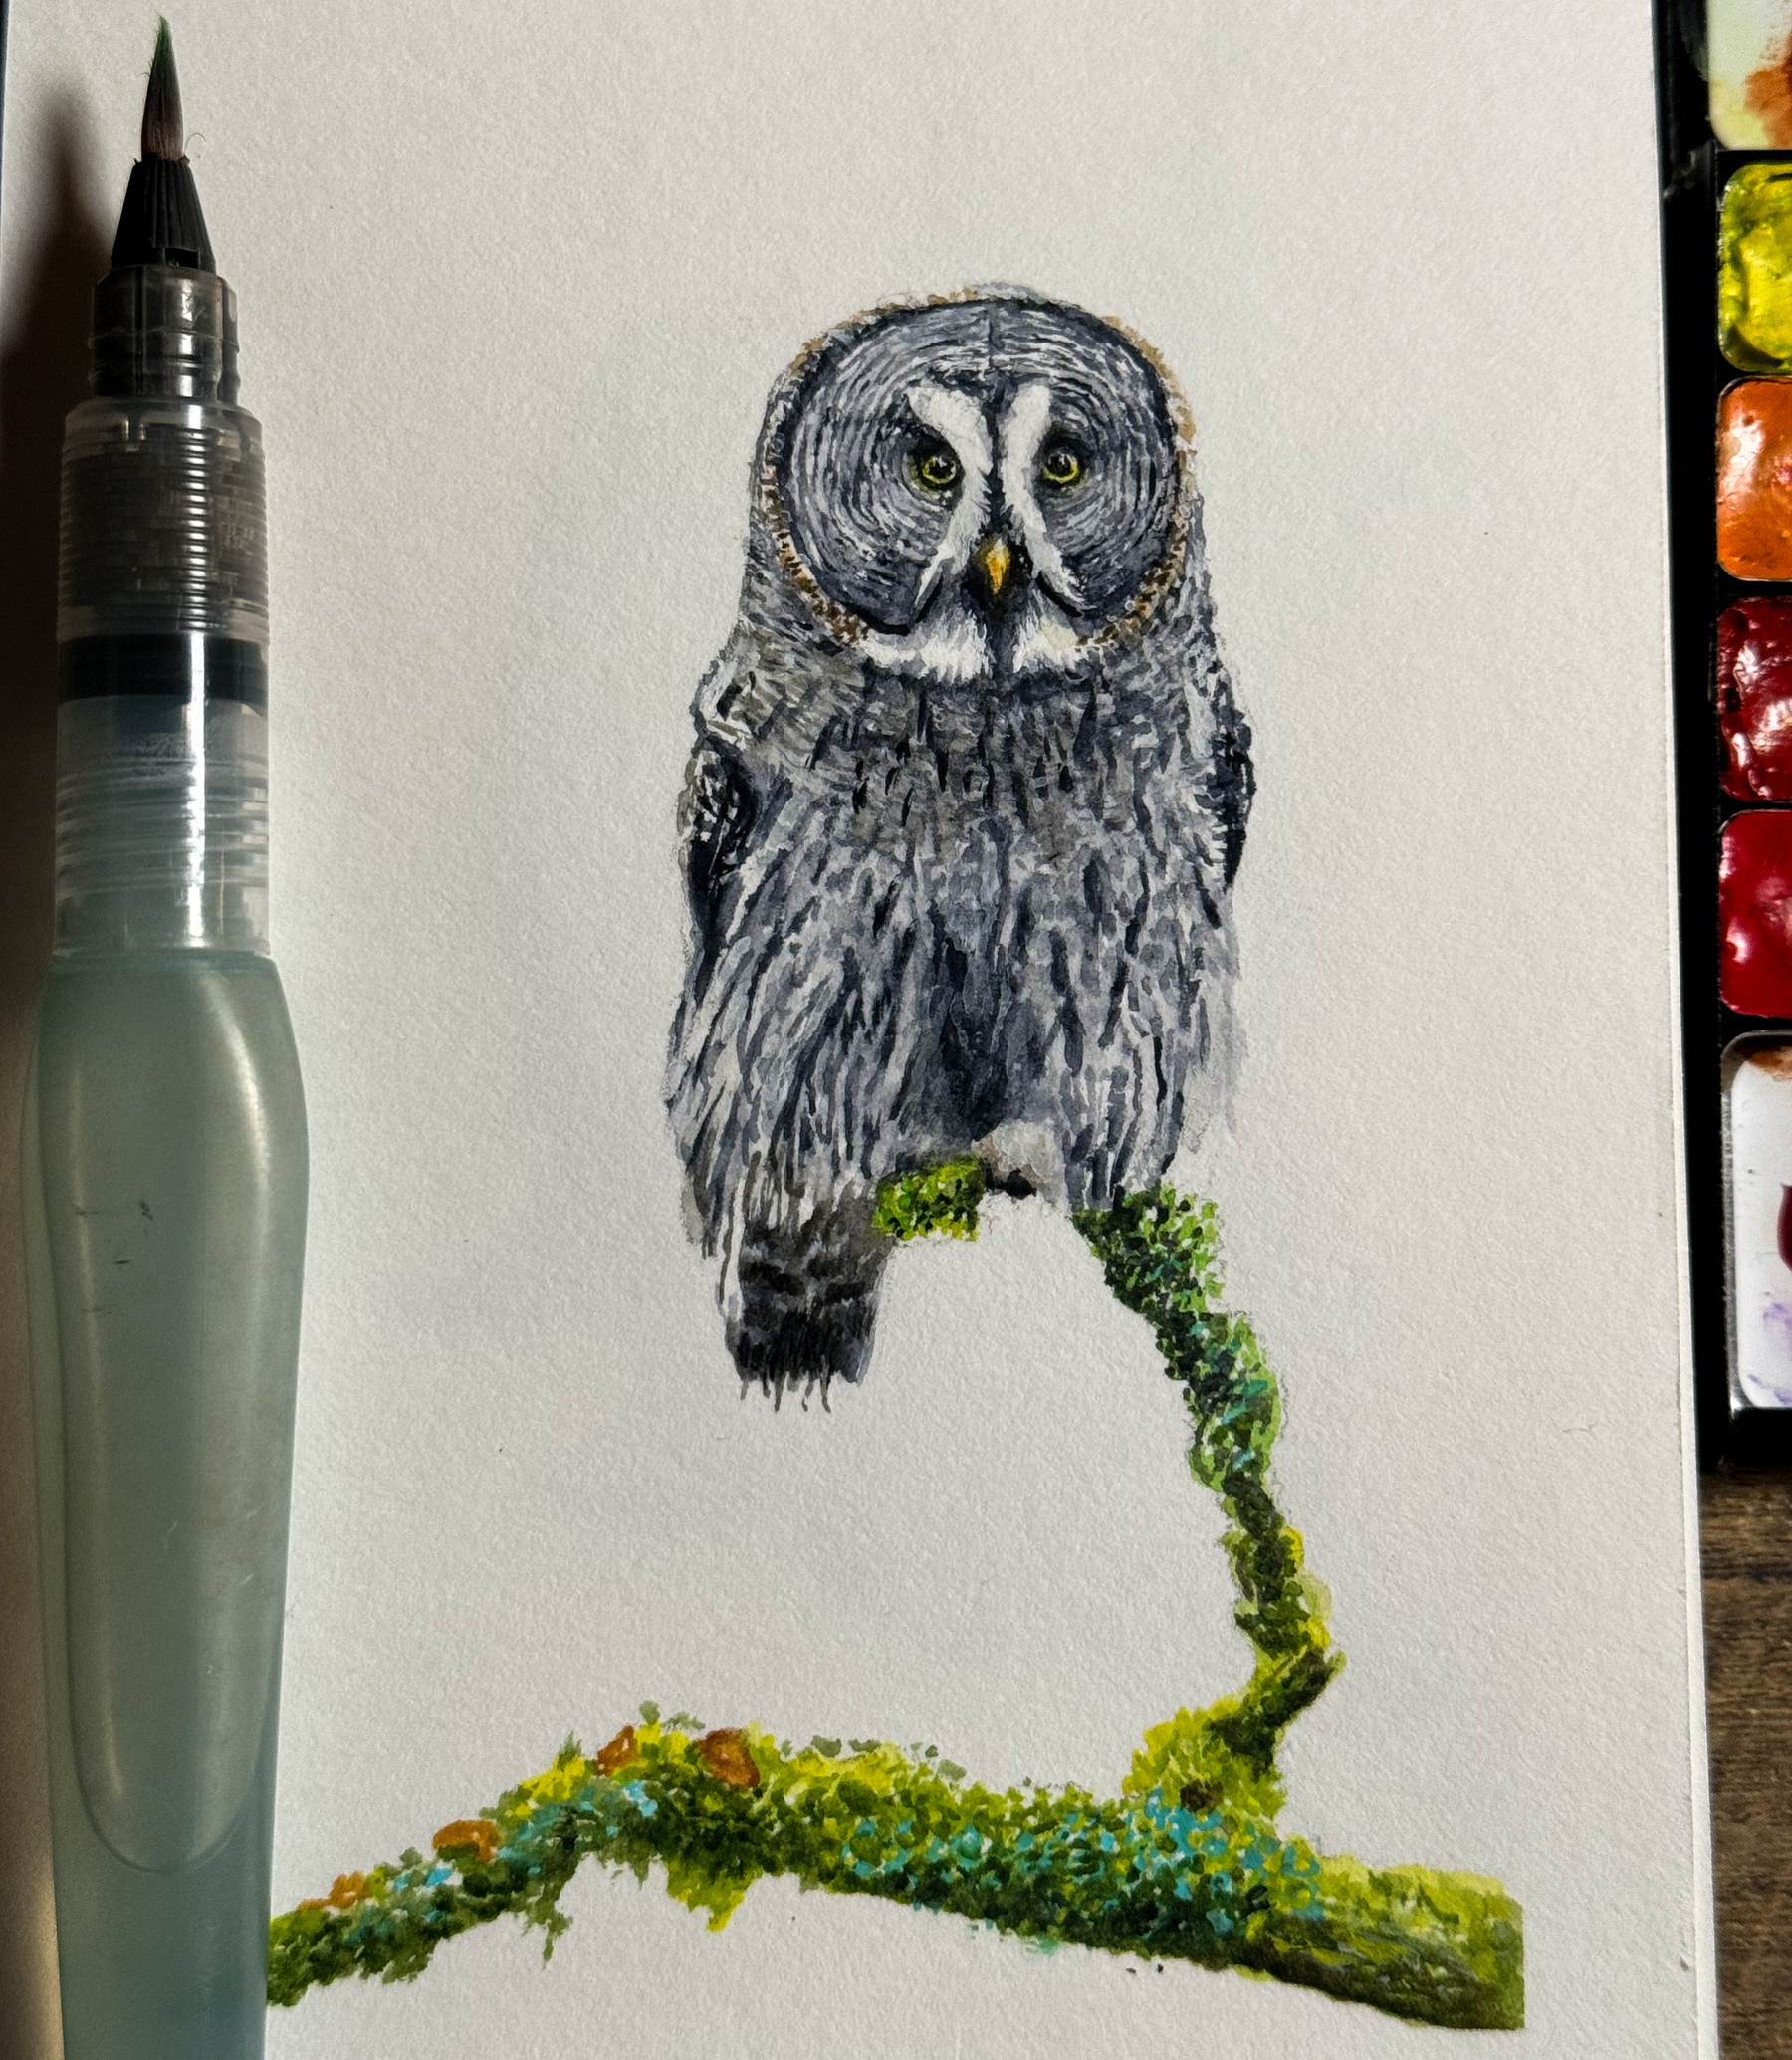 Watercolor painting of a grey owl perched on a green, mossy branch.